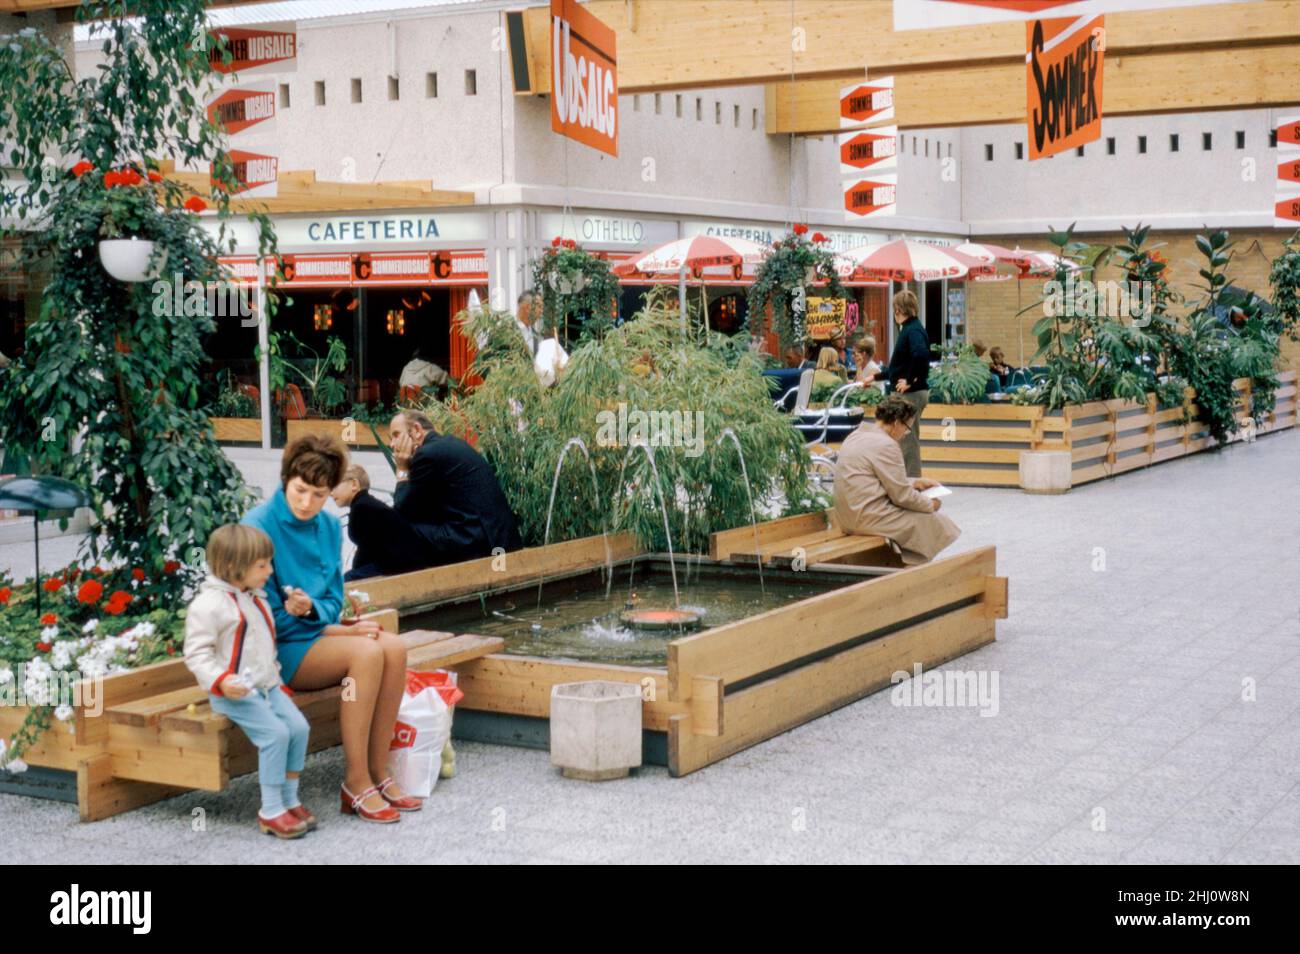 Undercover shopping at the Tarup Center on the western outskirts of Odense, Funen, Denmark in 1970. Red and white signs indicate that it is summer sale (sommer udsalg) time. The use of timber in the centre’s design is evident. The centre opened in 1968 with 21 stores and was the first covered shopping centre on Funen. It is now much expanded with over double the number of stores at the site and it has been extensively remodelled. Odense is the main city of the island of Funen. This image is from an amateur 35mm colour transparency – a vintage 1970s photograph. Stock Photo